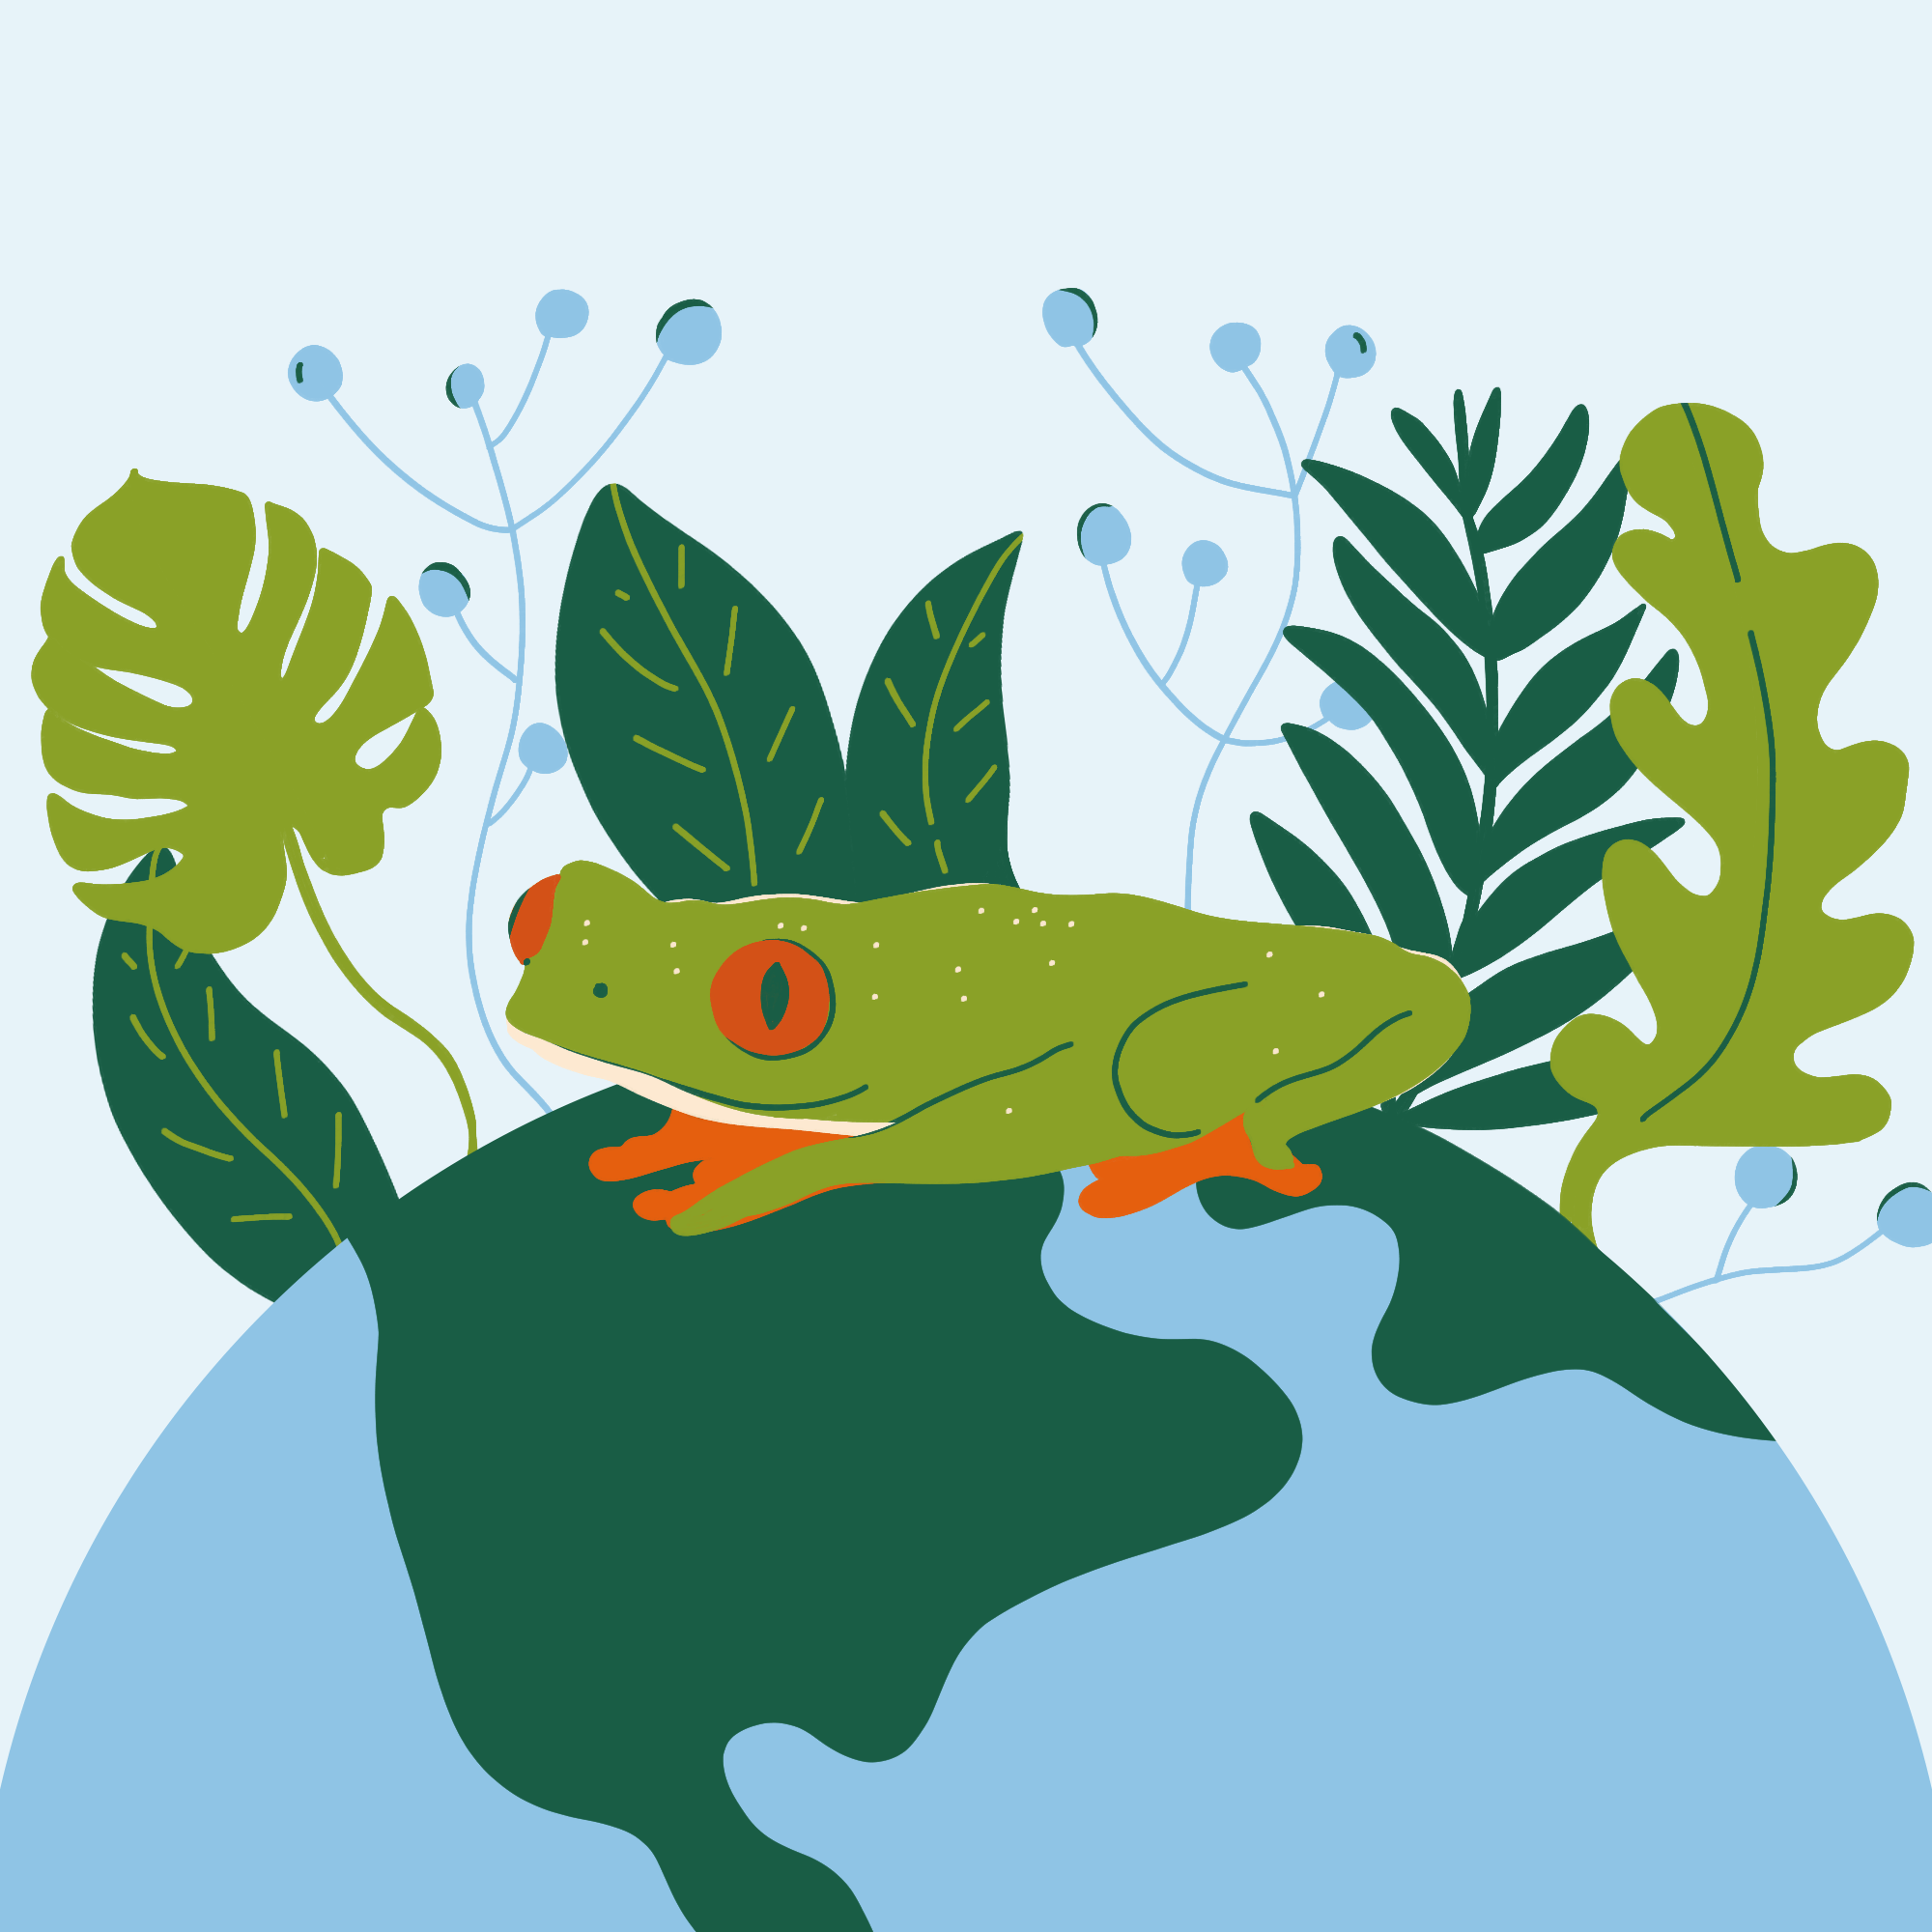 Graphic of a frog sitting on planet Earth with greenery